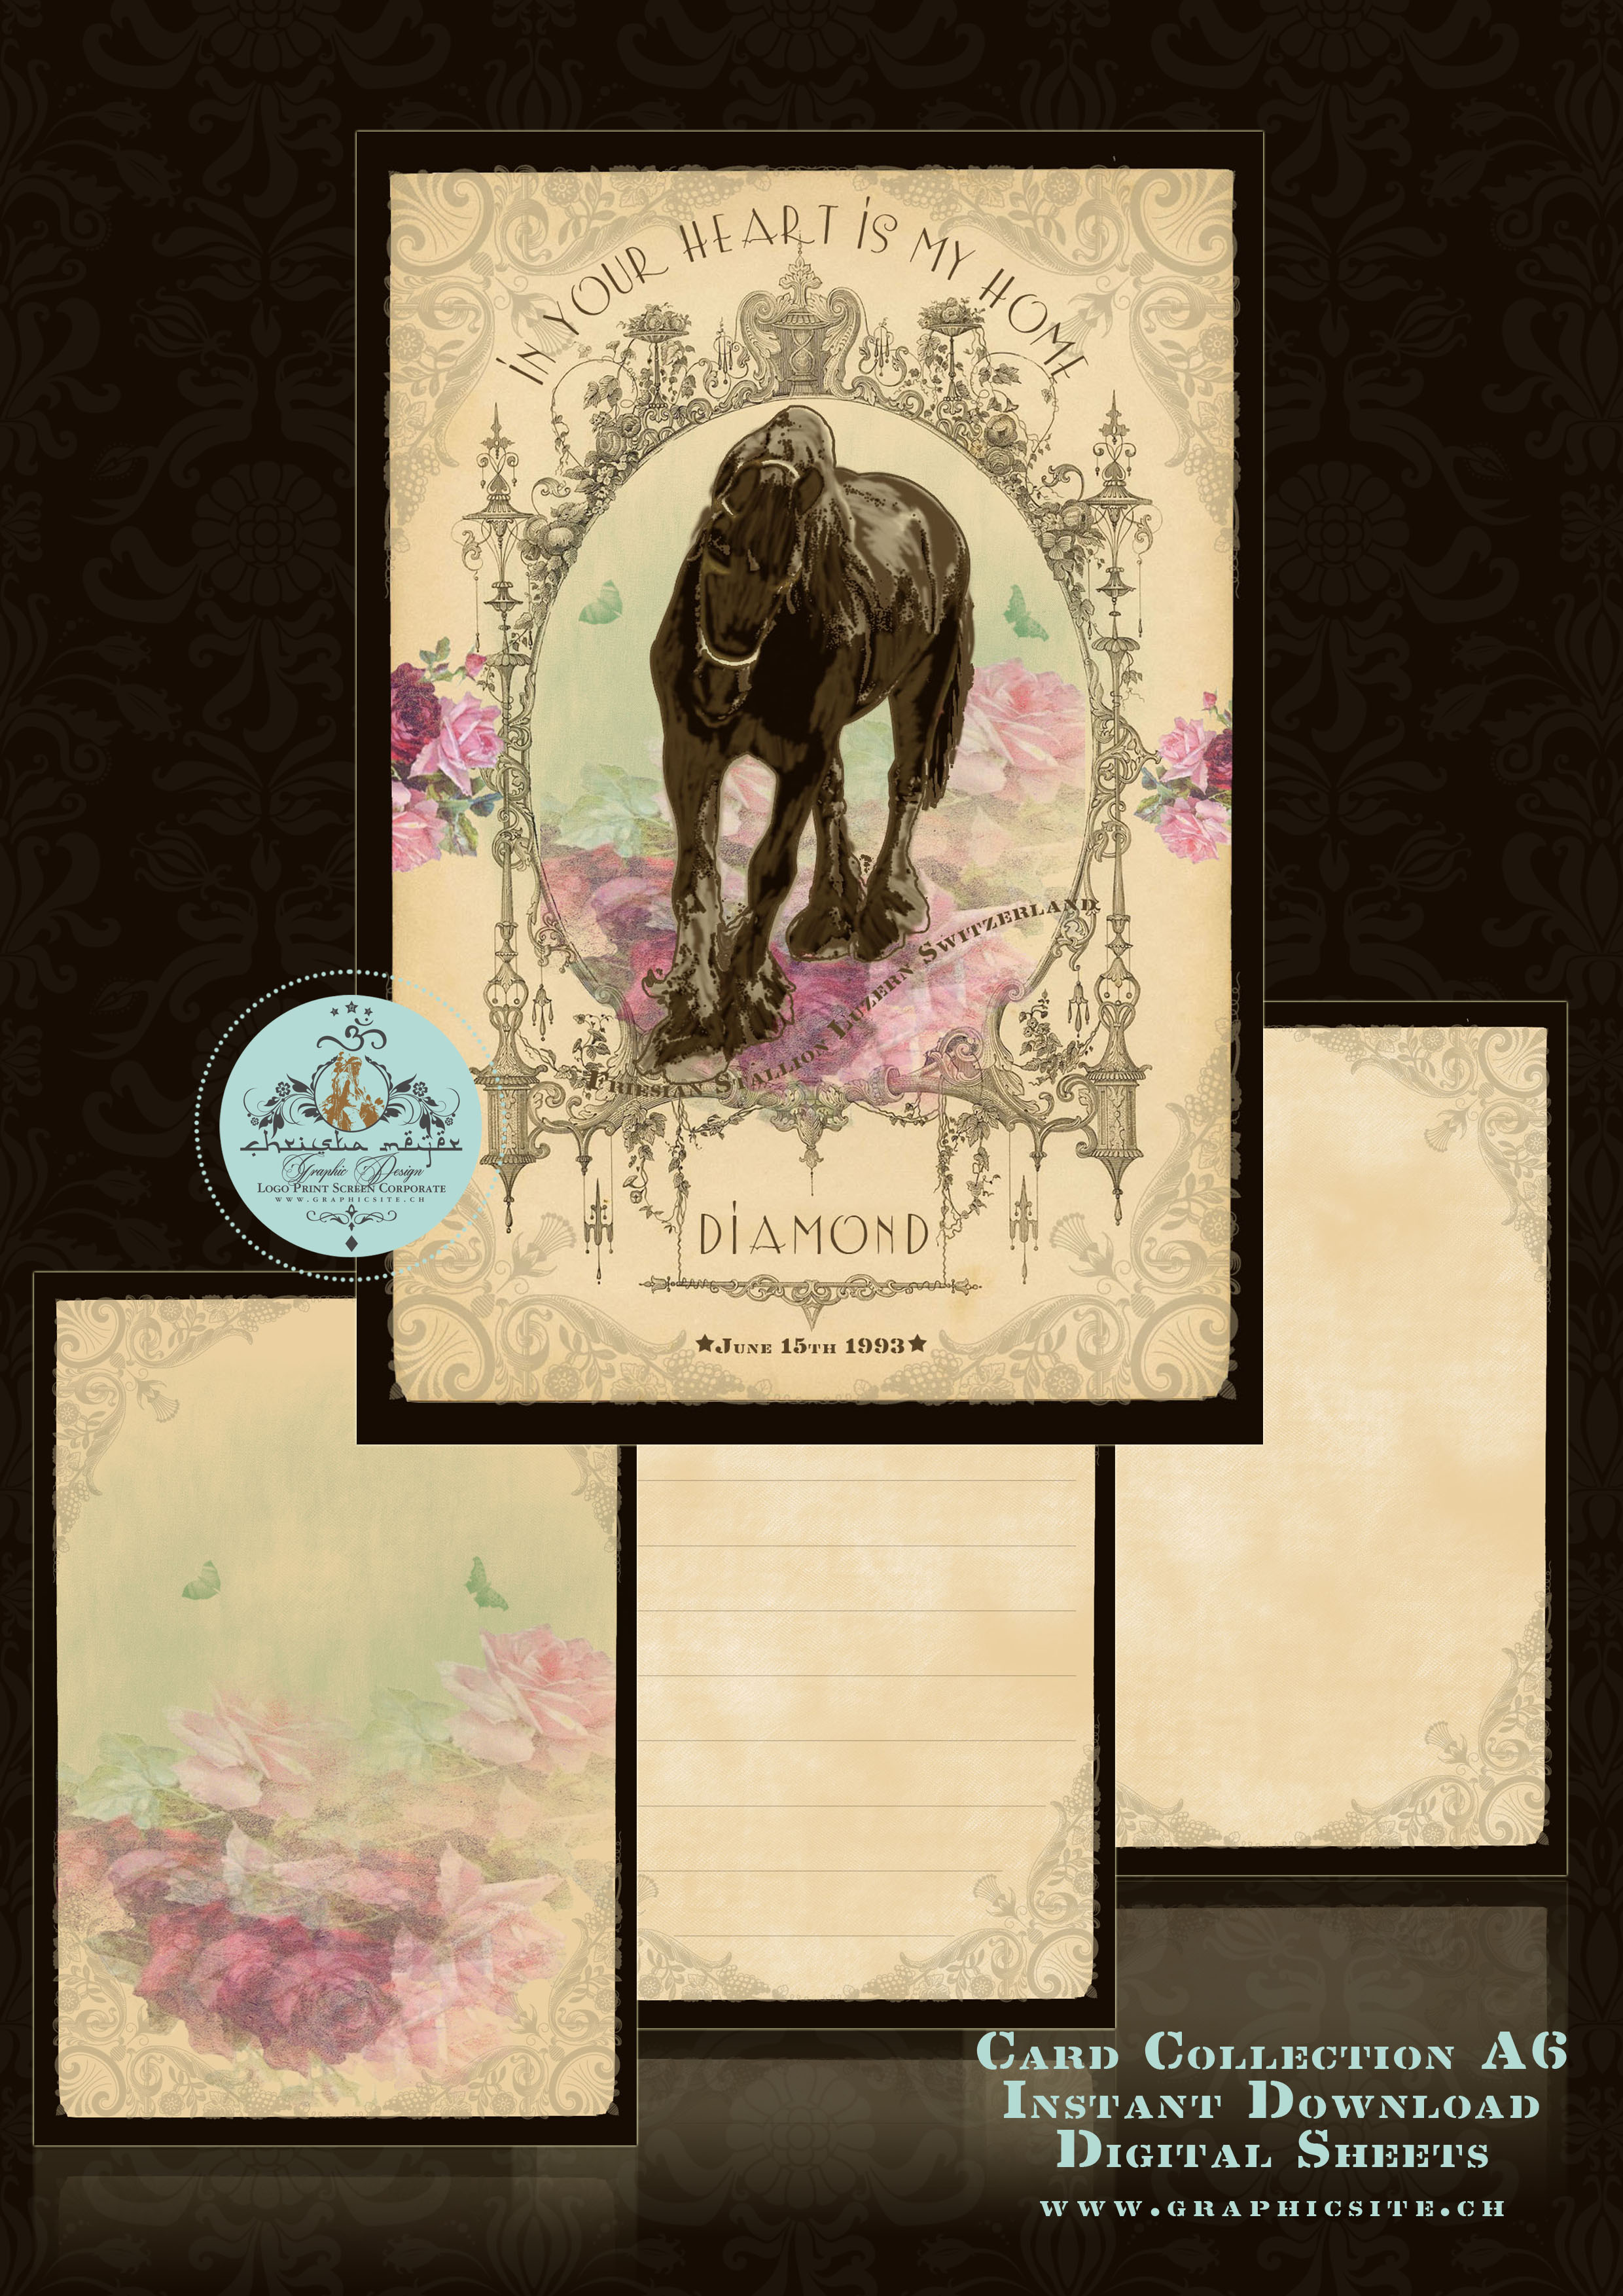 HorsePoem, Card Collection, Horse, Friesian, Flowers, Roses, floral, Ornament, 